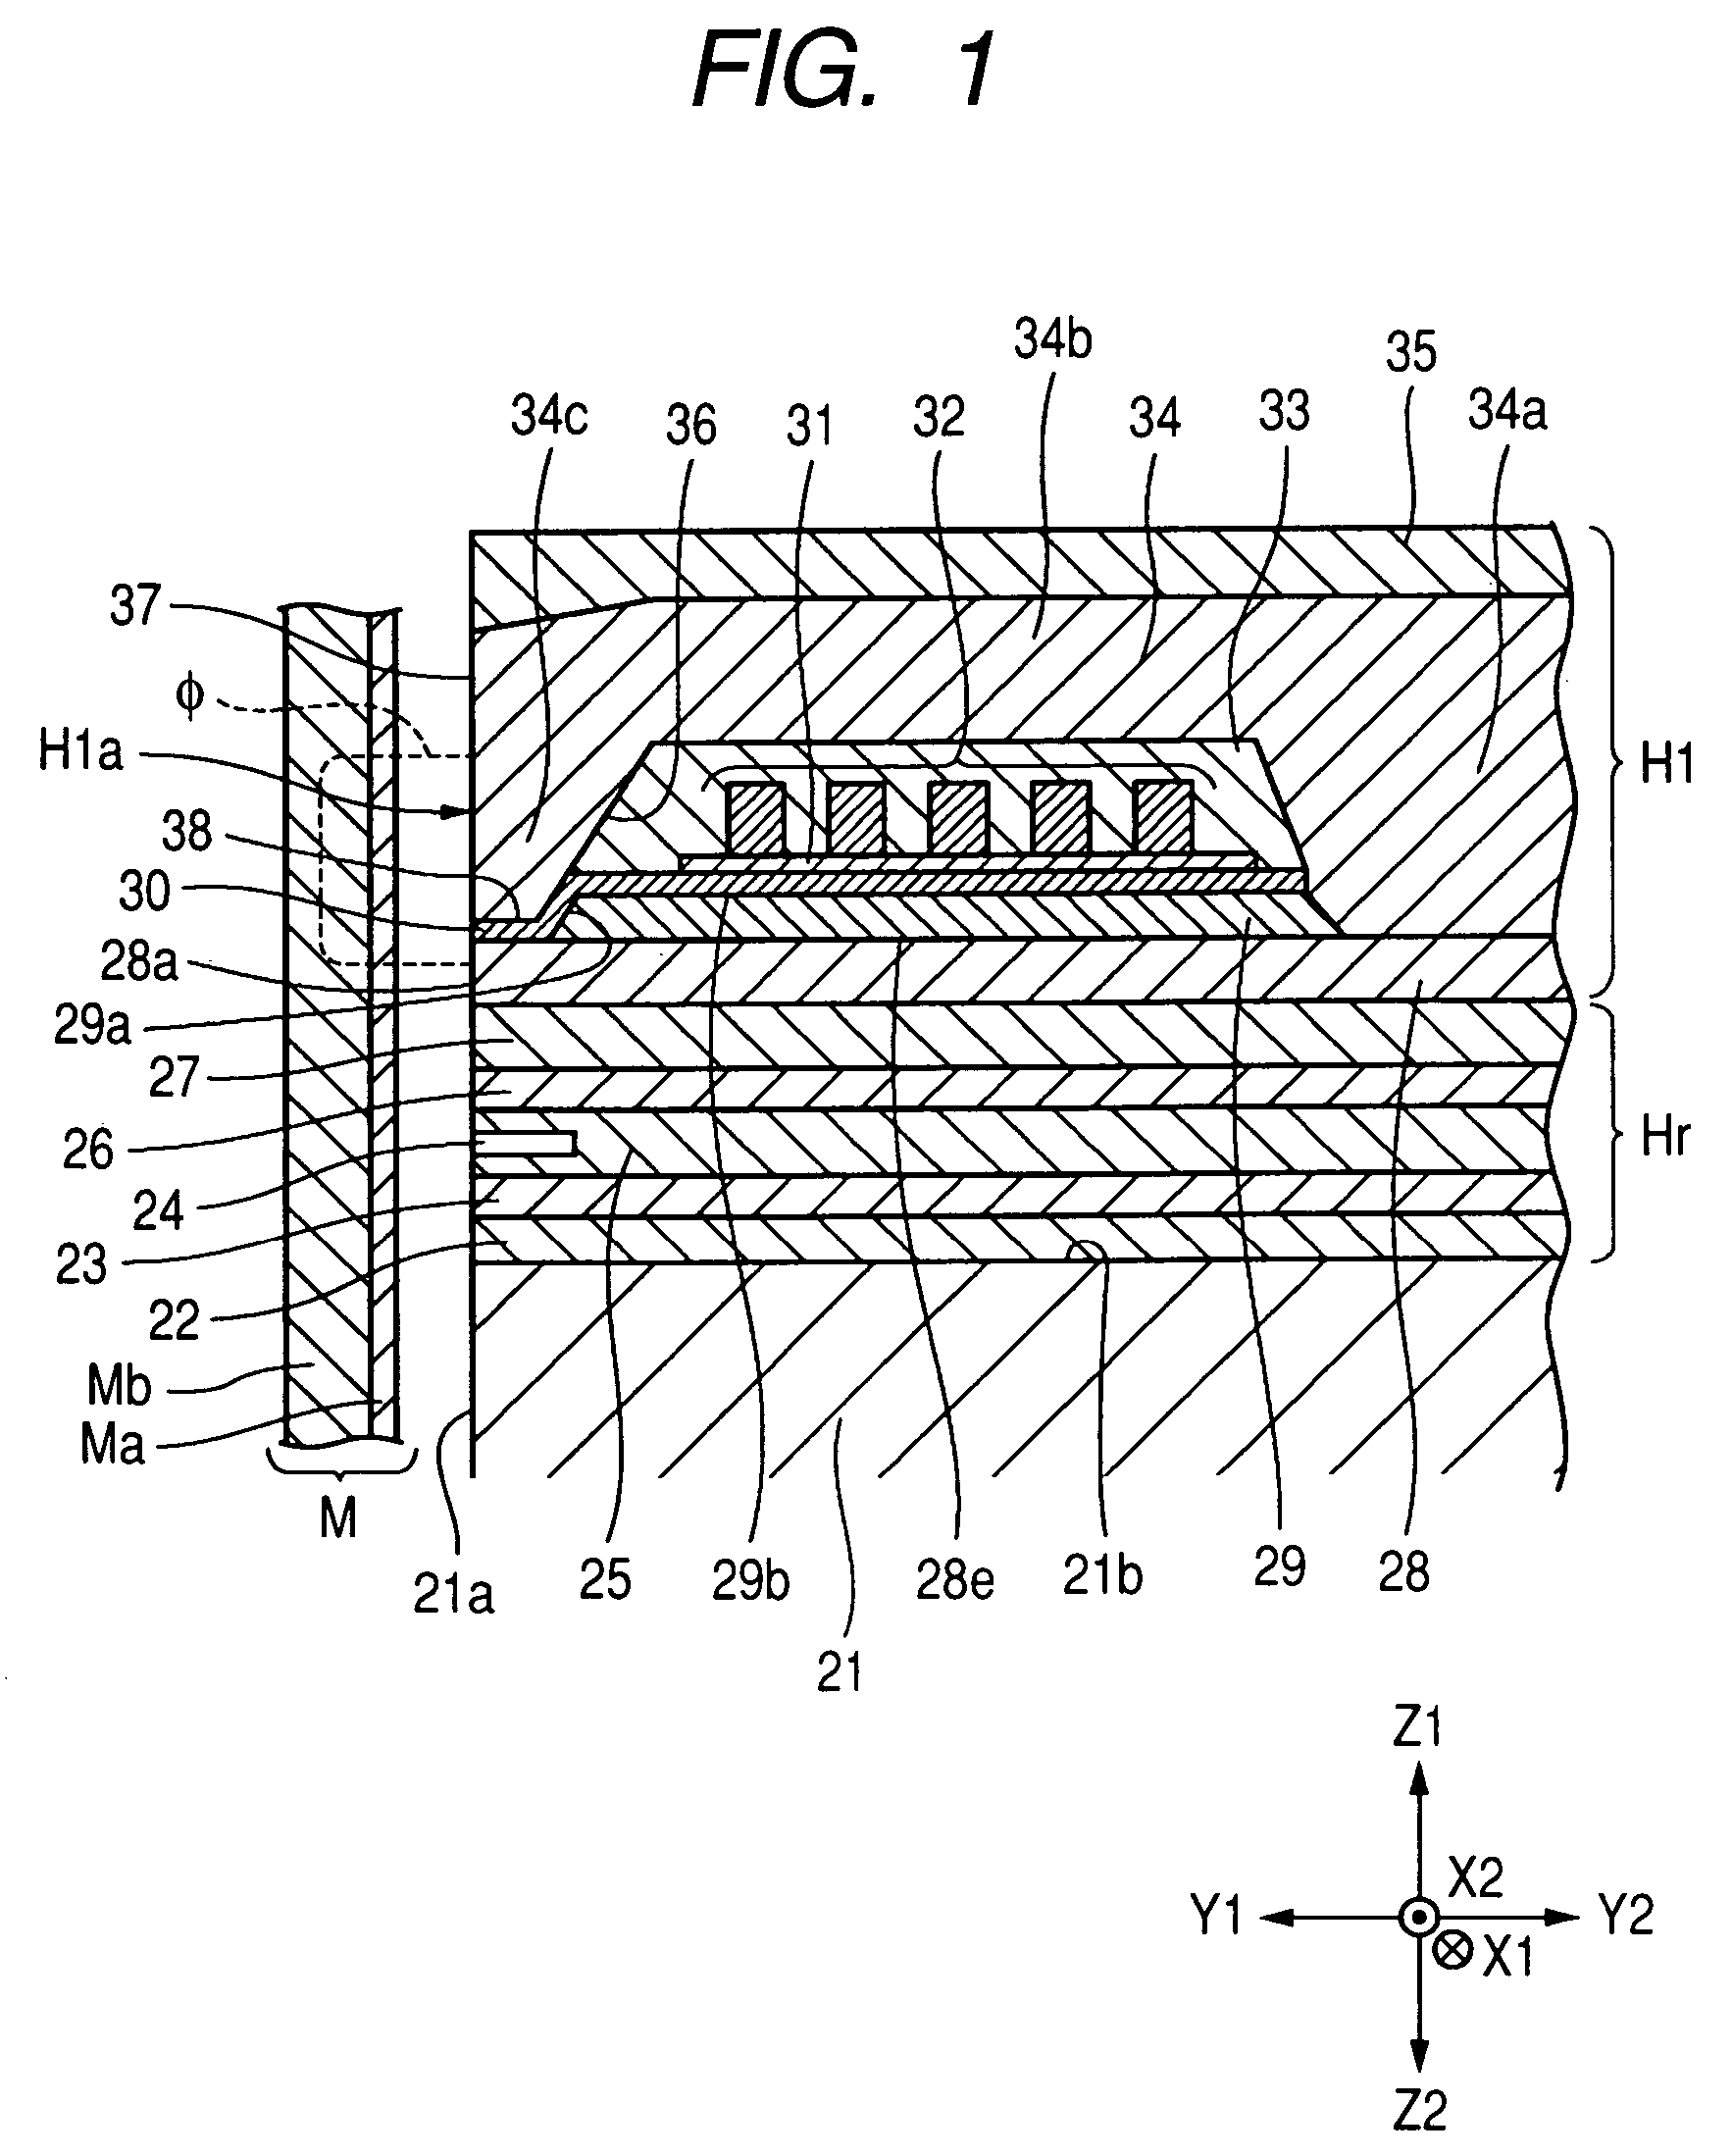 Magnetic recording head including main magnetic pole layer, return path layer, and coil layer